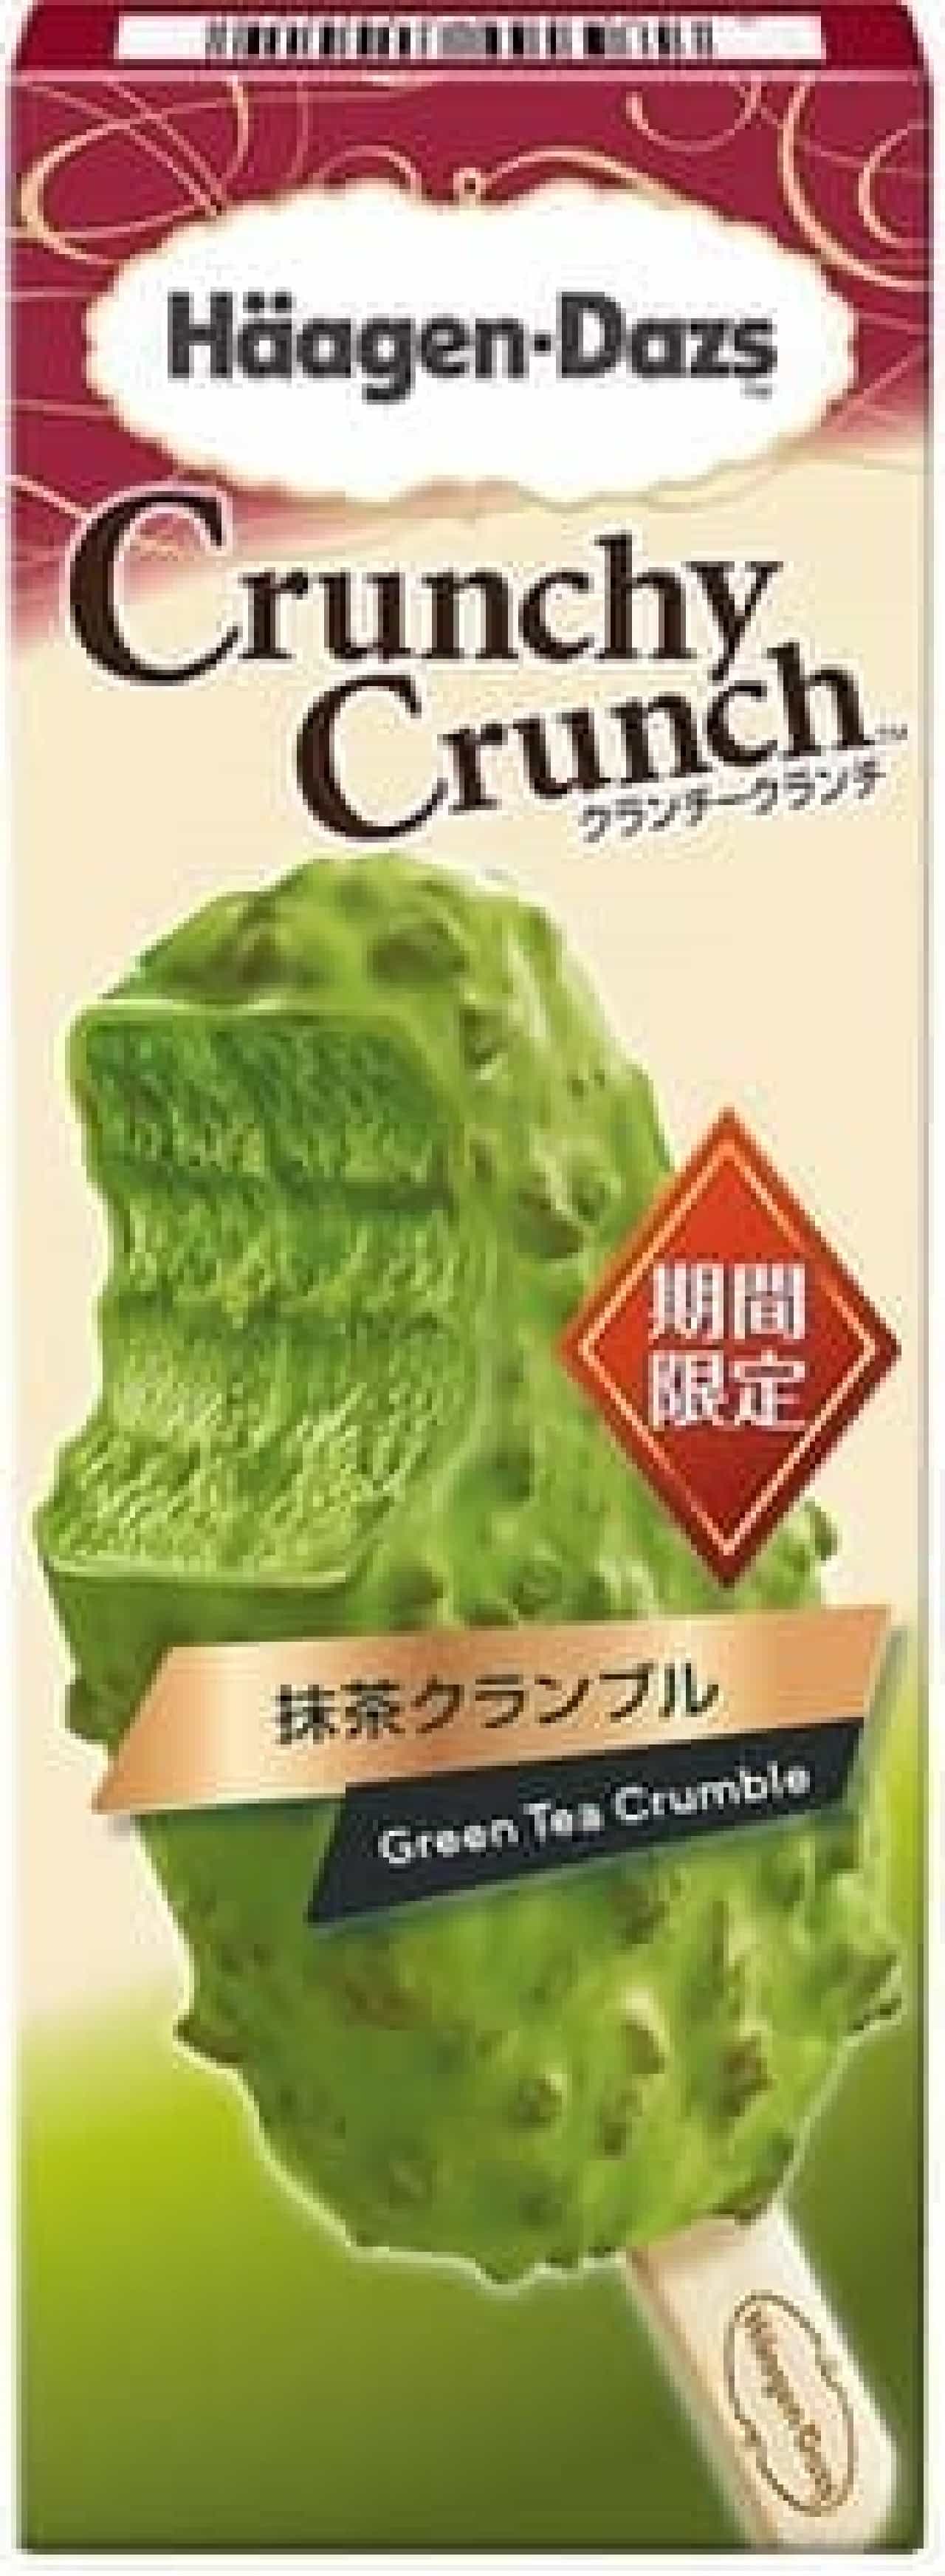 Crunch filled with the charm of matcha-crunch!